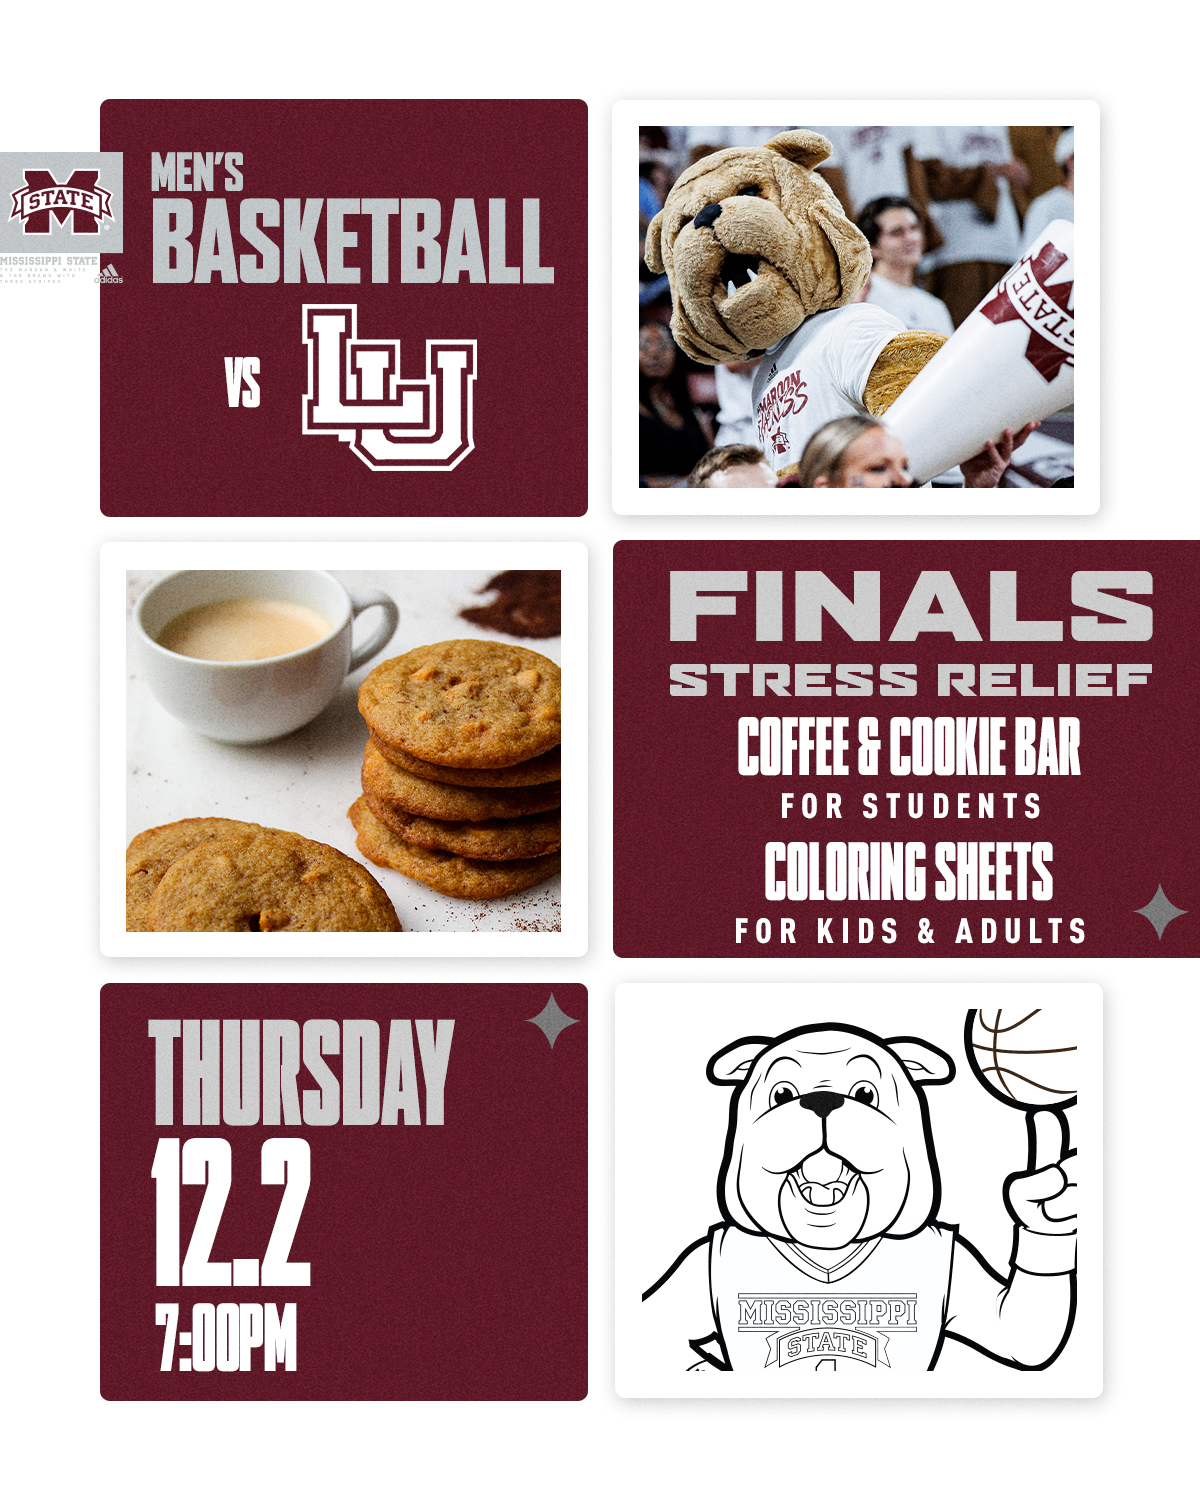 Maroon and white graphic announcing that coffee and cookies will be available for MSU students and coloring sheets will be available for kids and adults at MSU's men's basketball game on Dec. 2